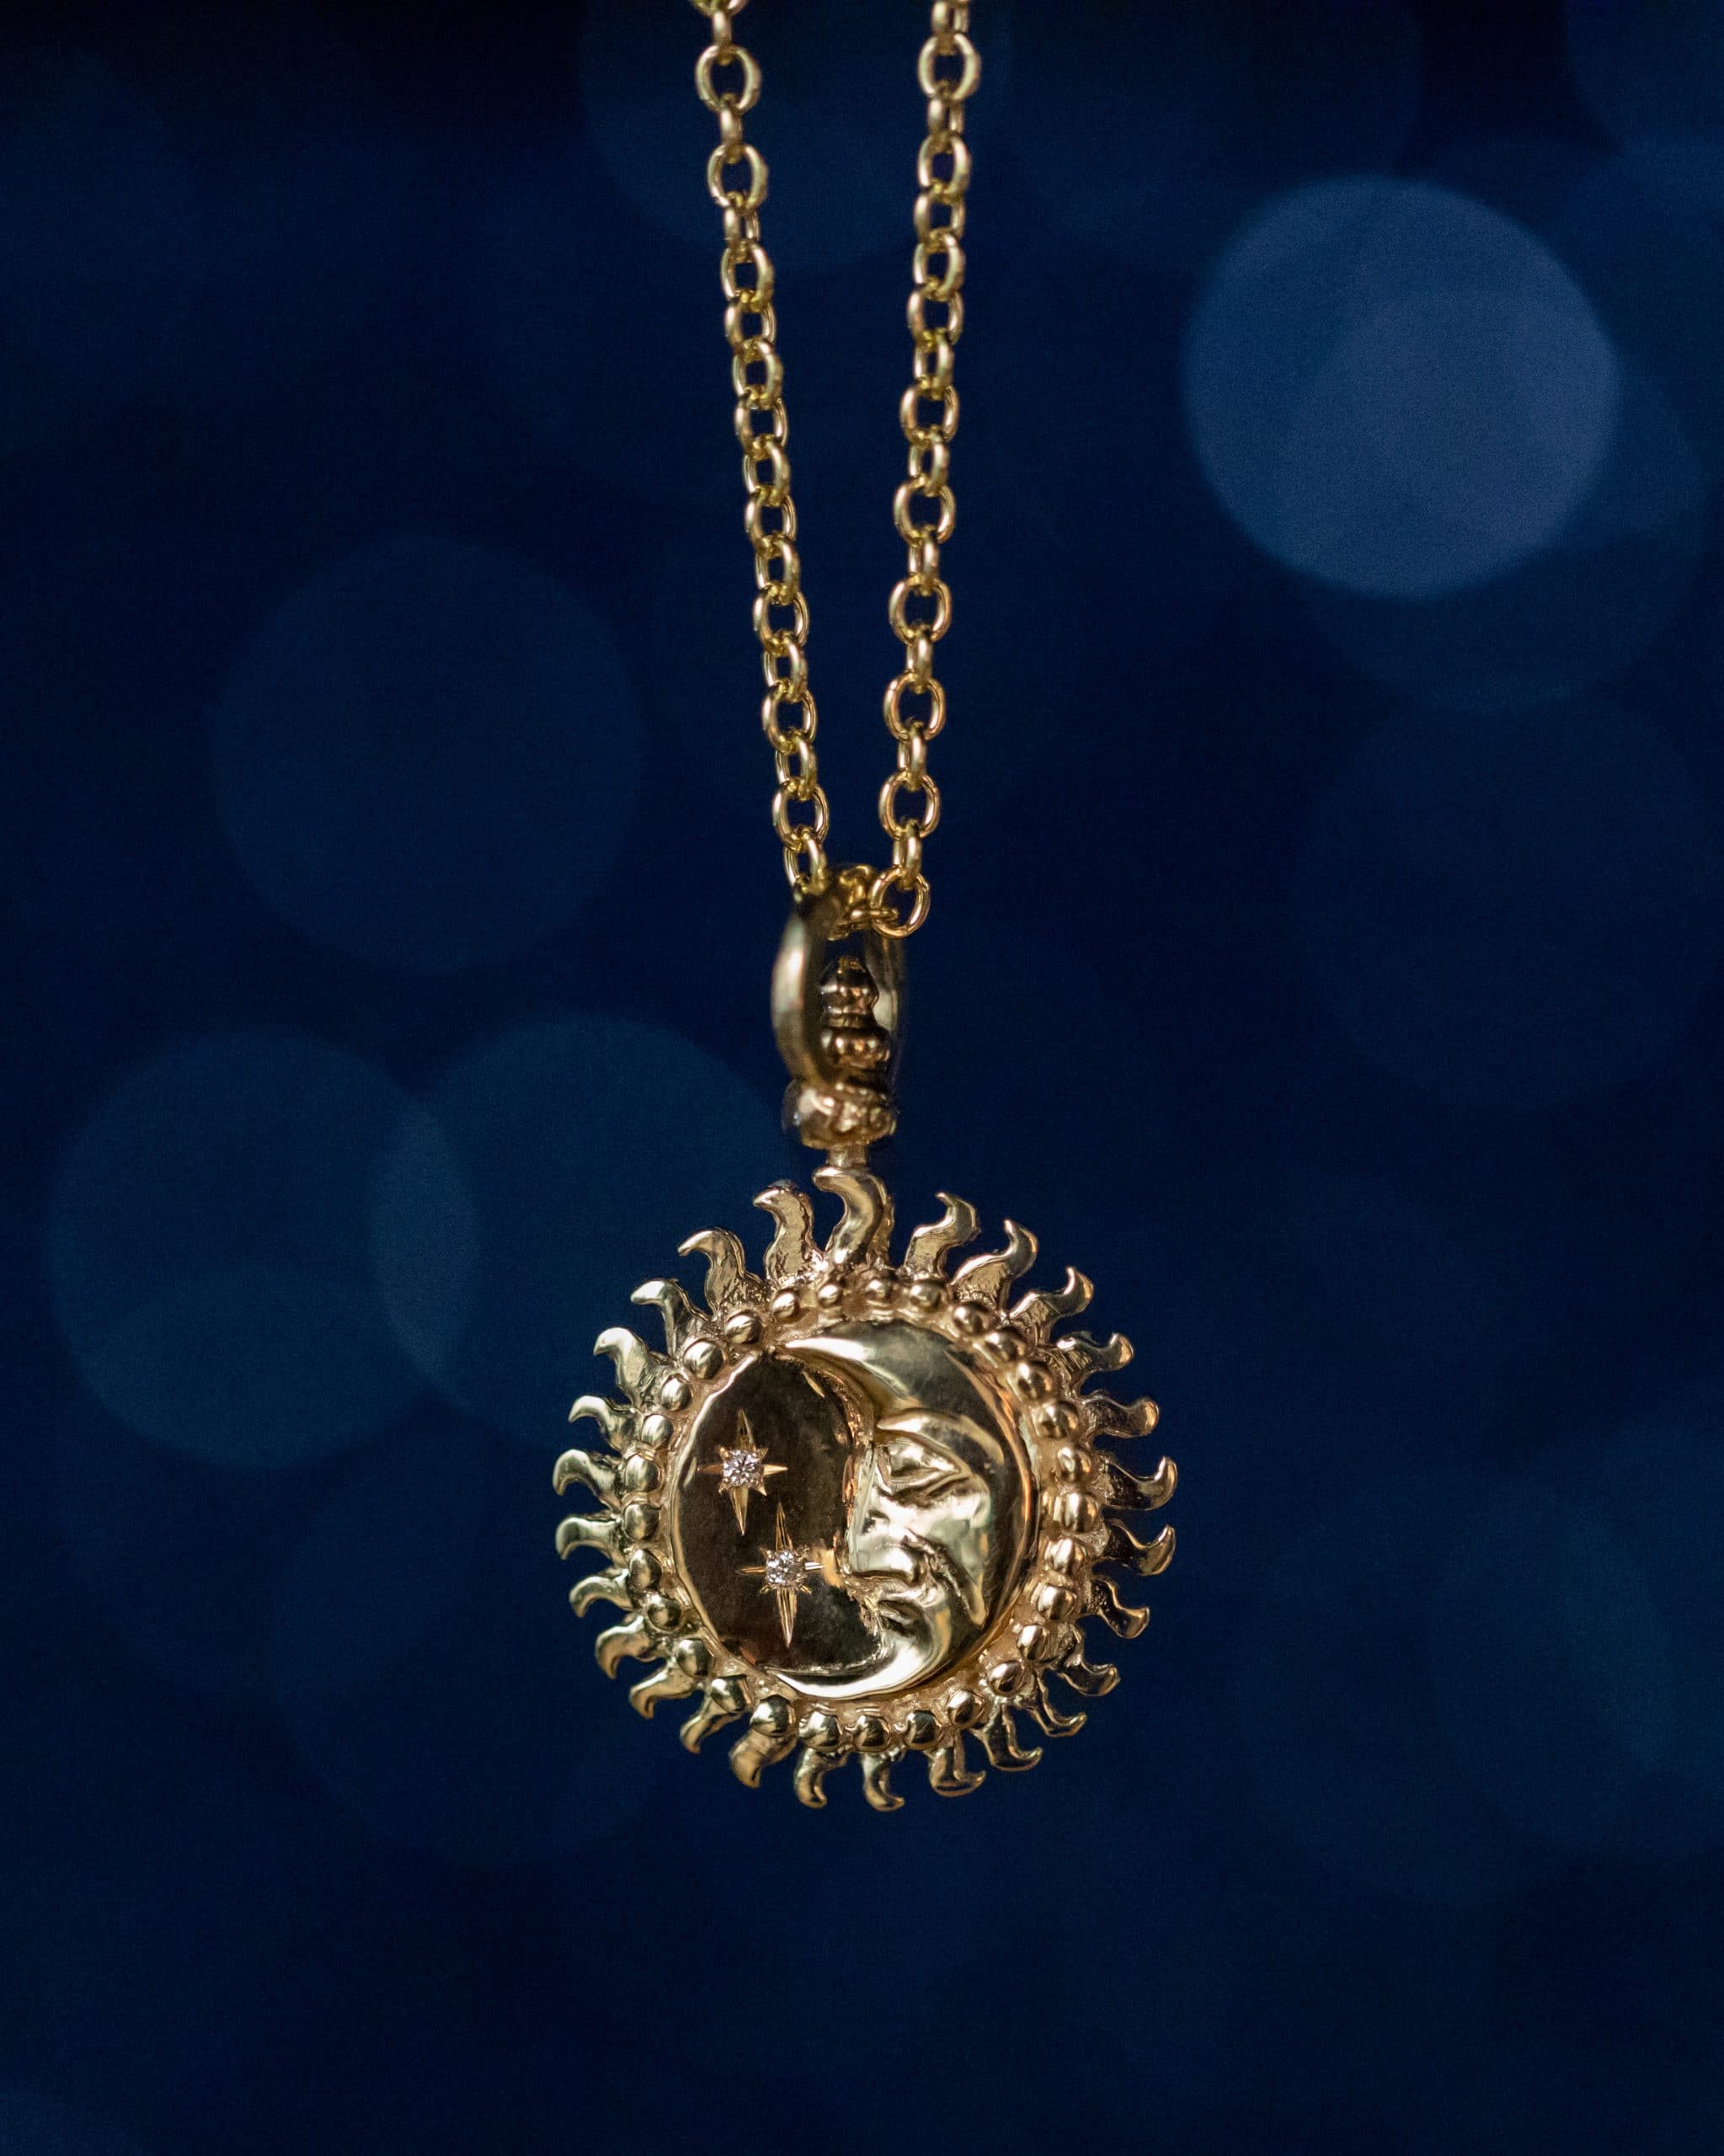 Buy Moon and Star Coin Necklace 18K Gold Vermeil Necklace Handmade Jewelry  Crescent Moon Pendant CZ Star Charms Astrology Necklace Online in India -  Etsy